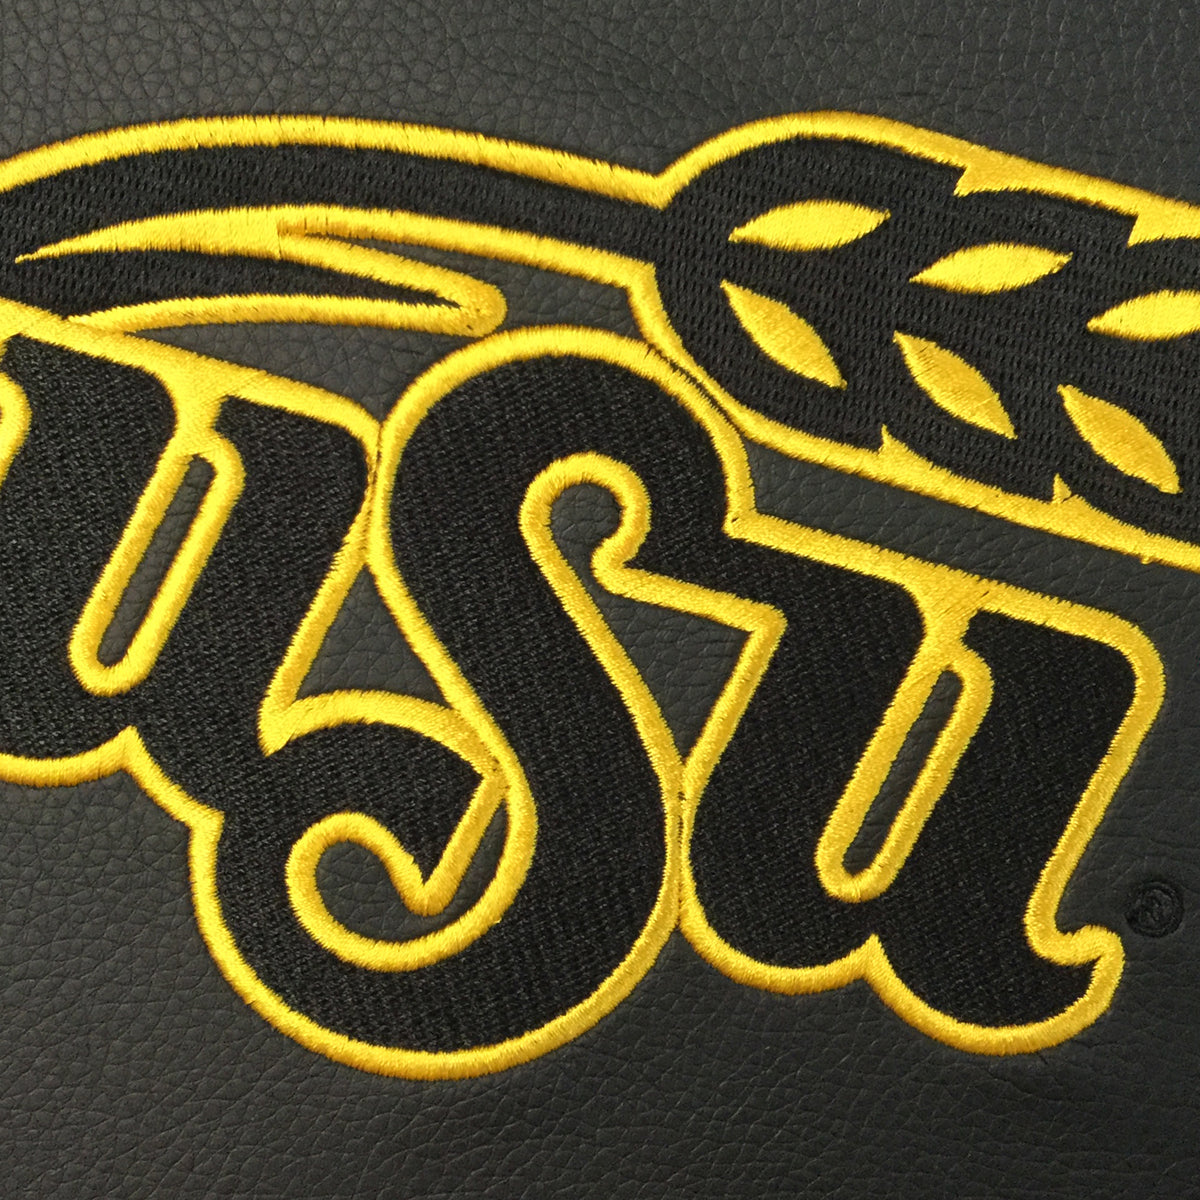 Silver Club Chair with Wichita State Primary Logo